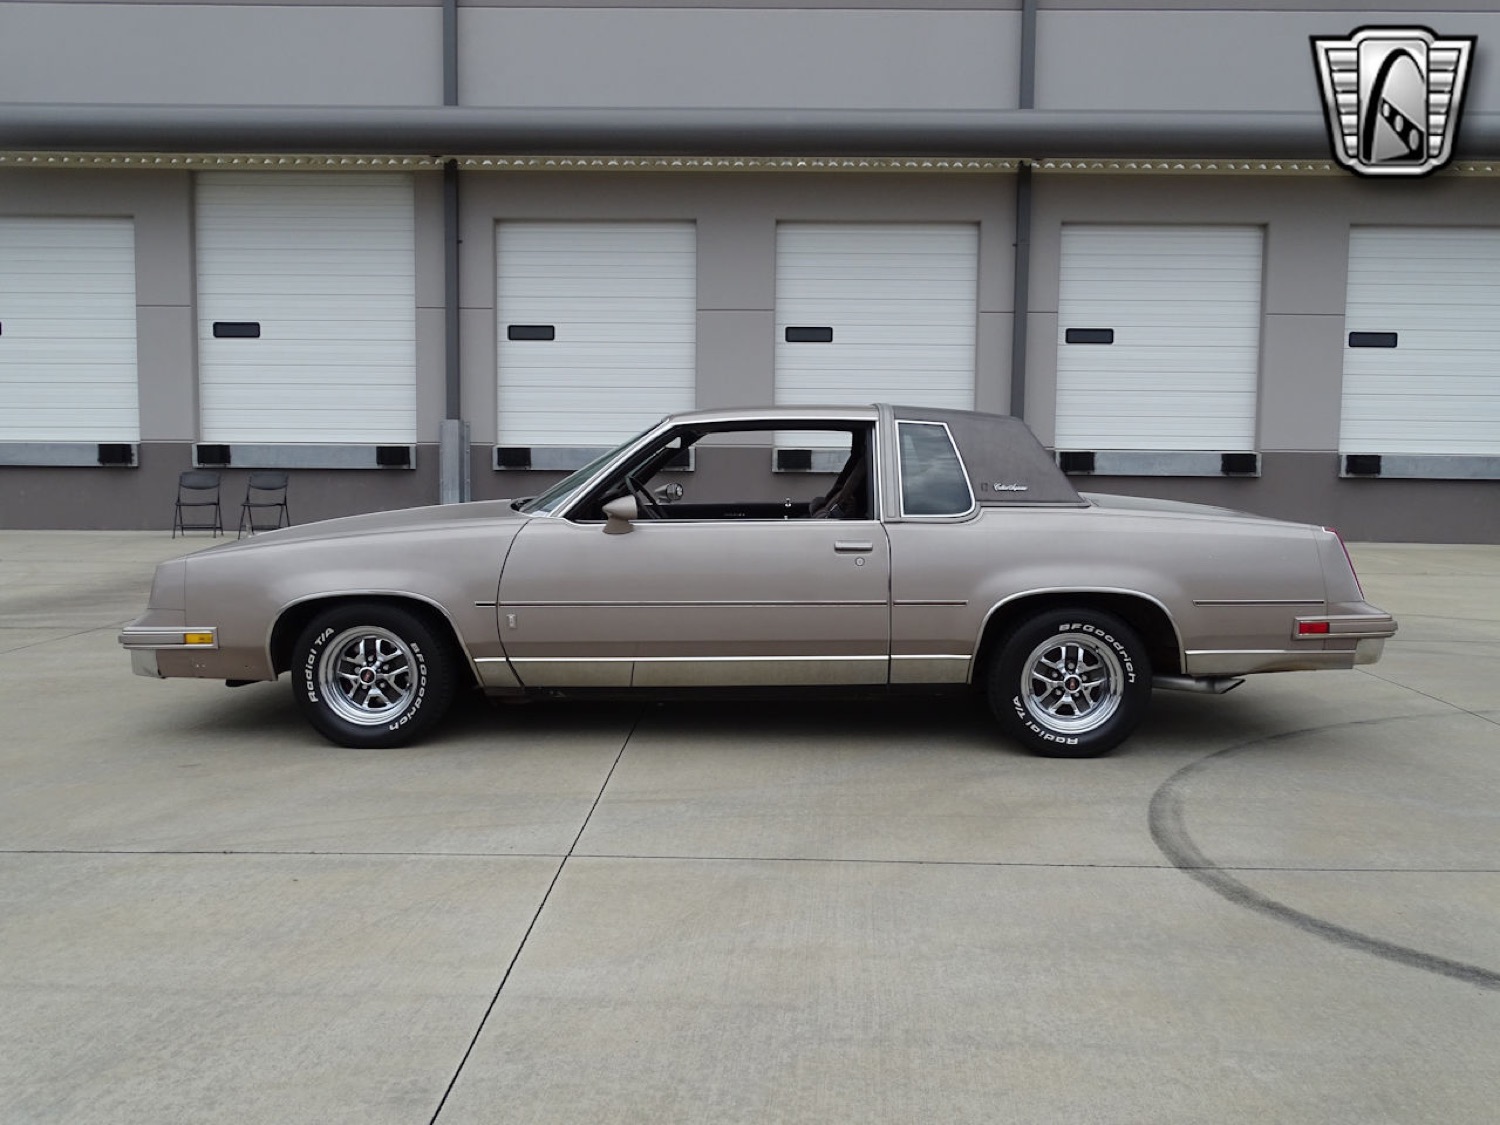 1984 Oldsmobile Cutlass Supreme Up For Sale: Video | GM Authority